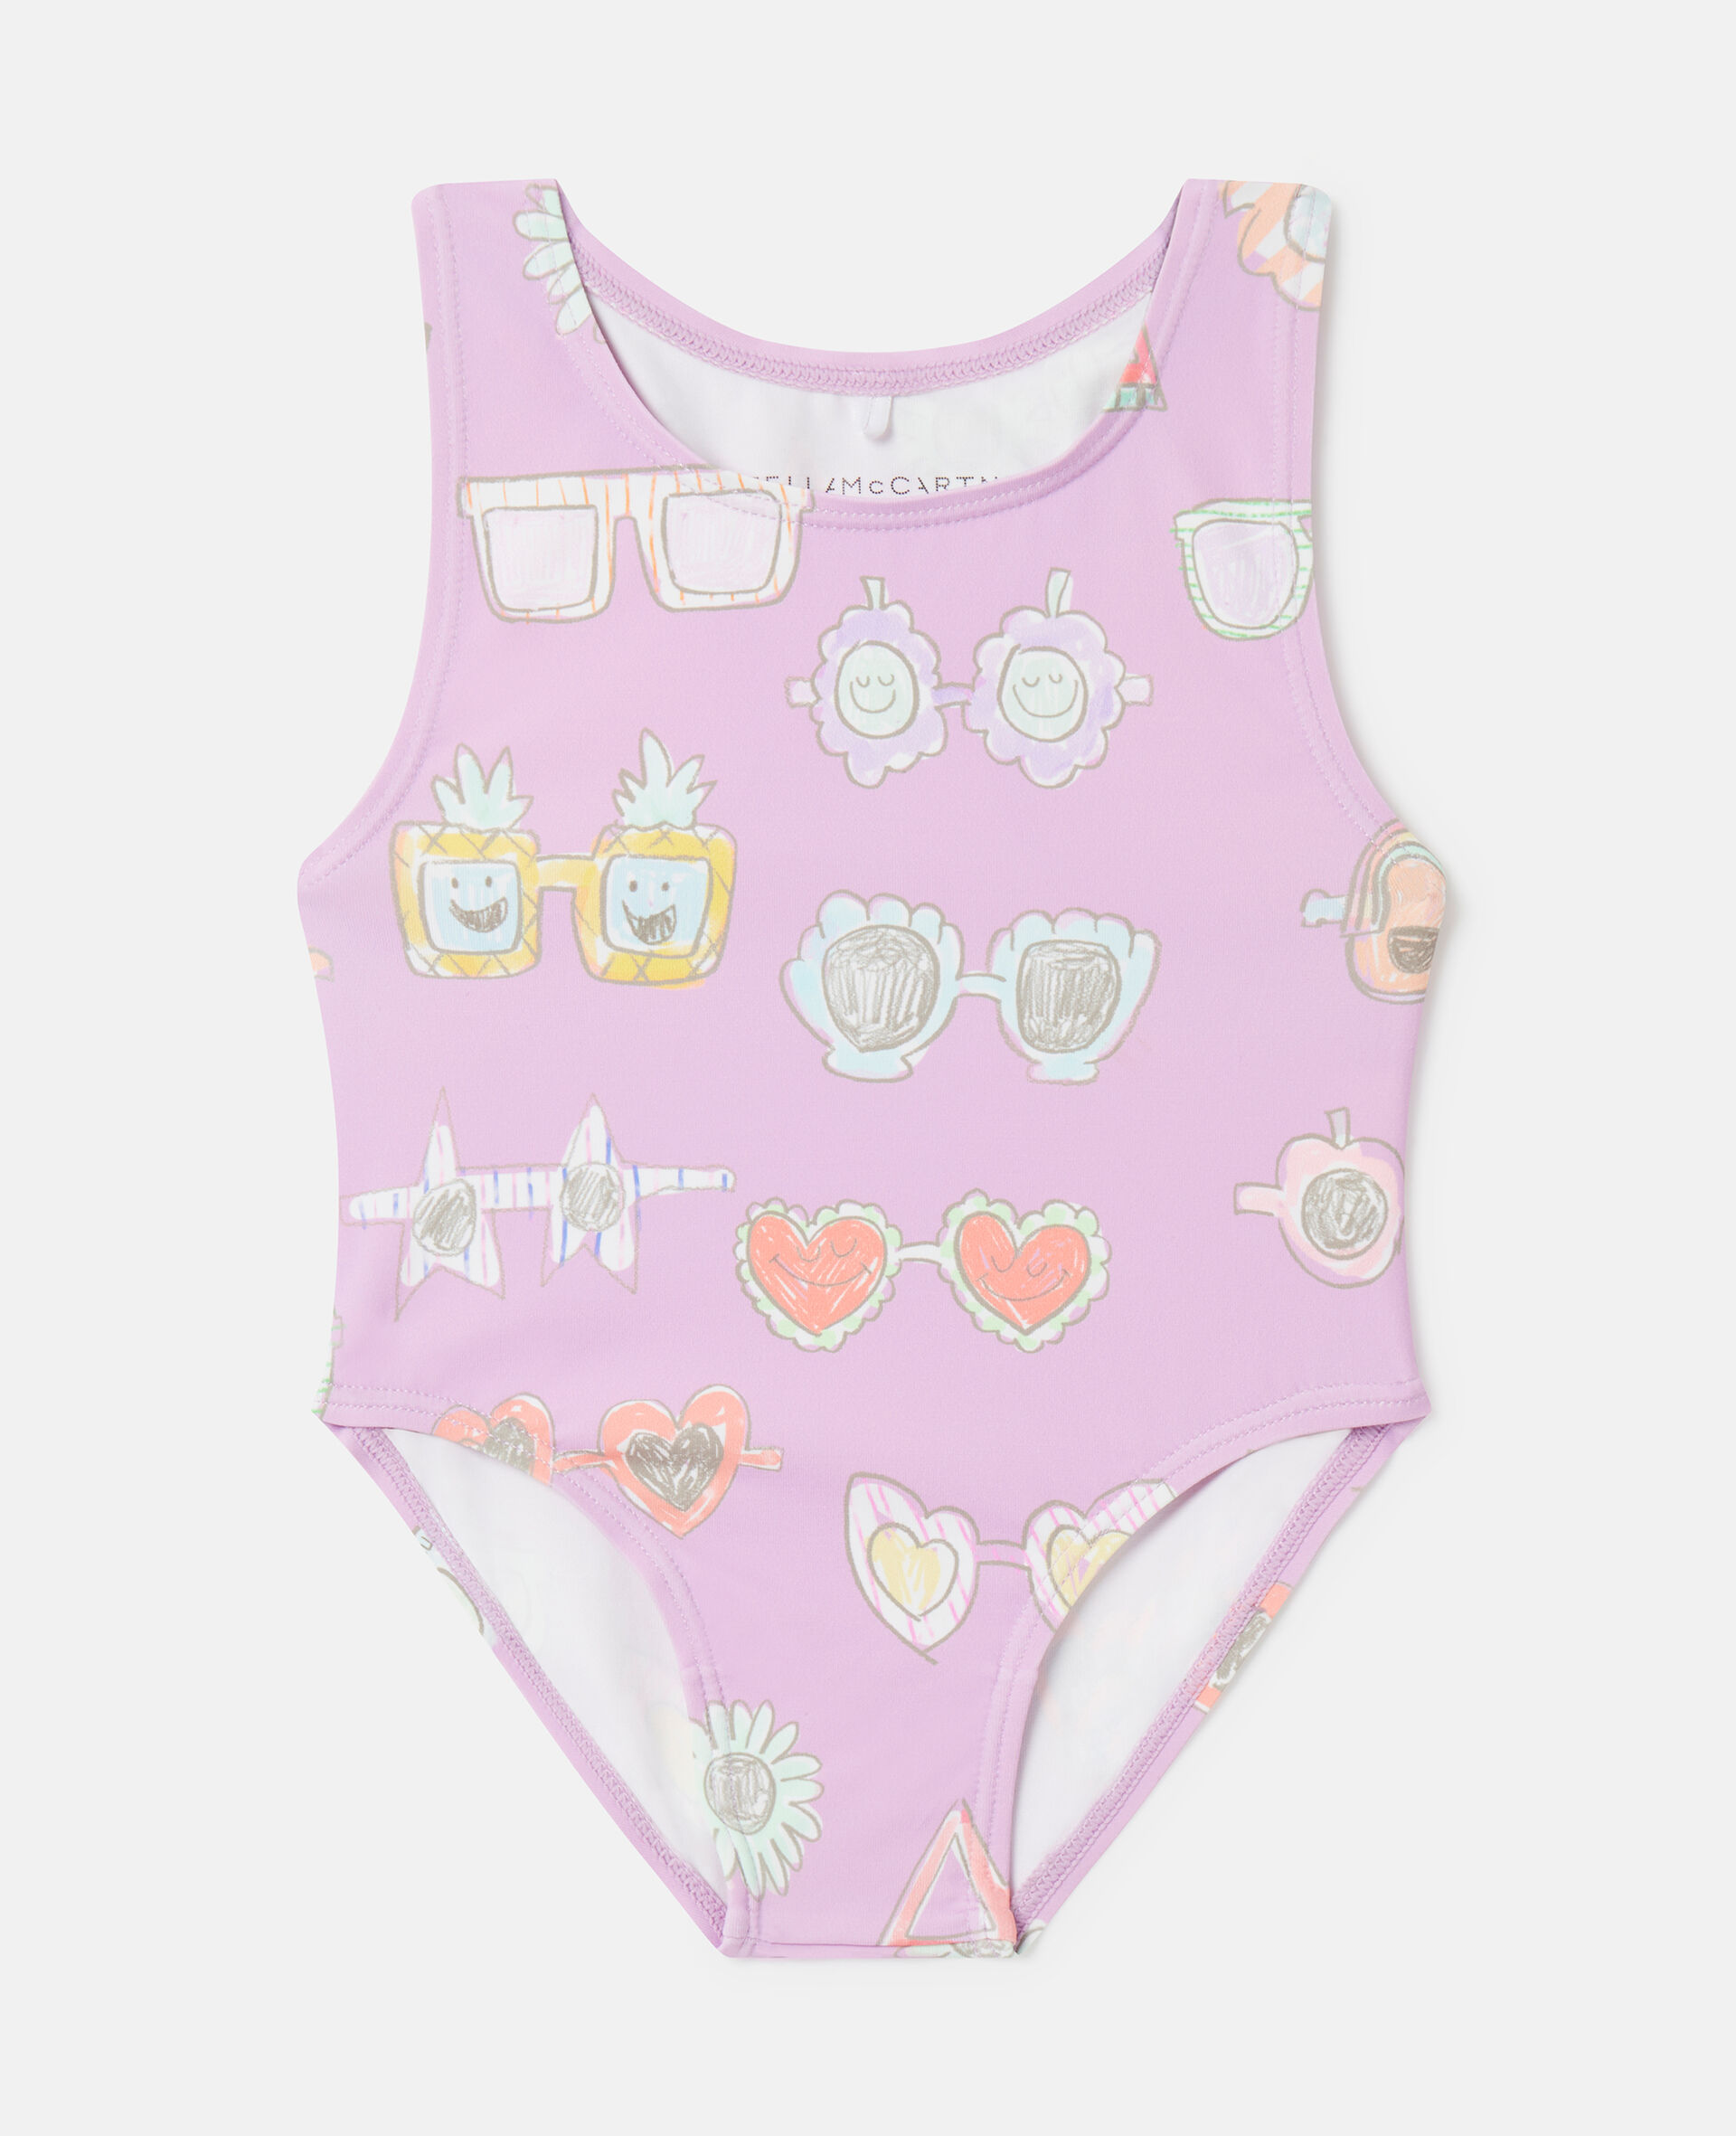 Sunglasses Doodle Print Swimsuit-Rose-large image number 0